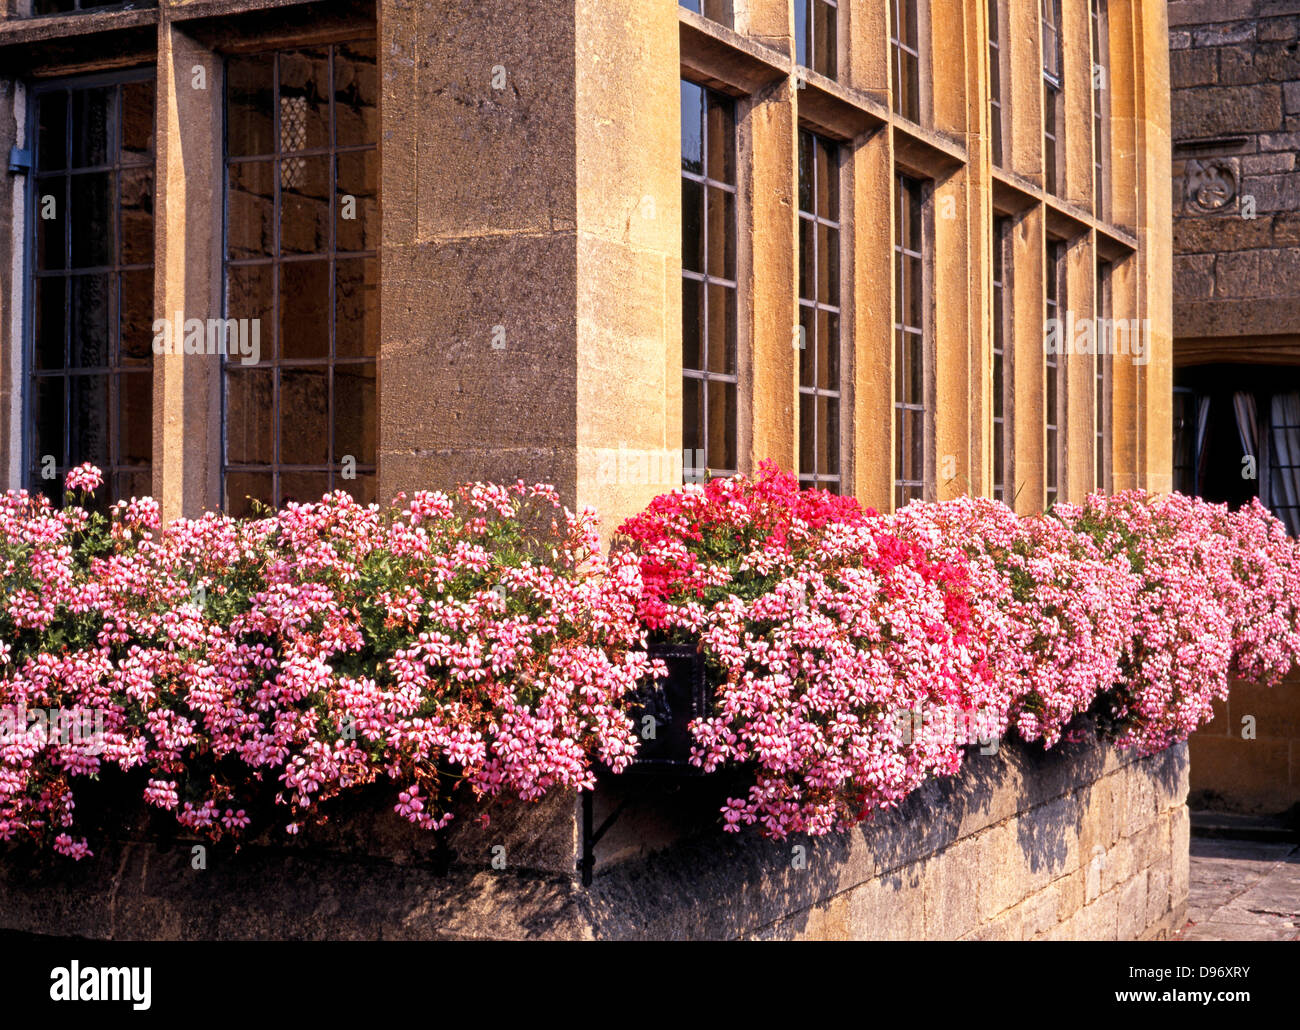 Colourful window box under a typical costwold stone window, Broadway, Worcestershire, Cotswolds, England, UK. Stock Photo